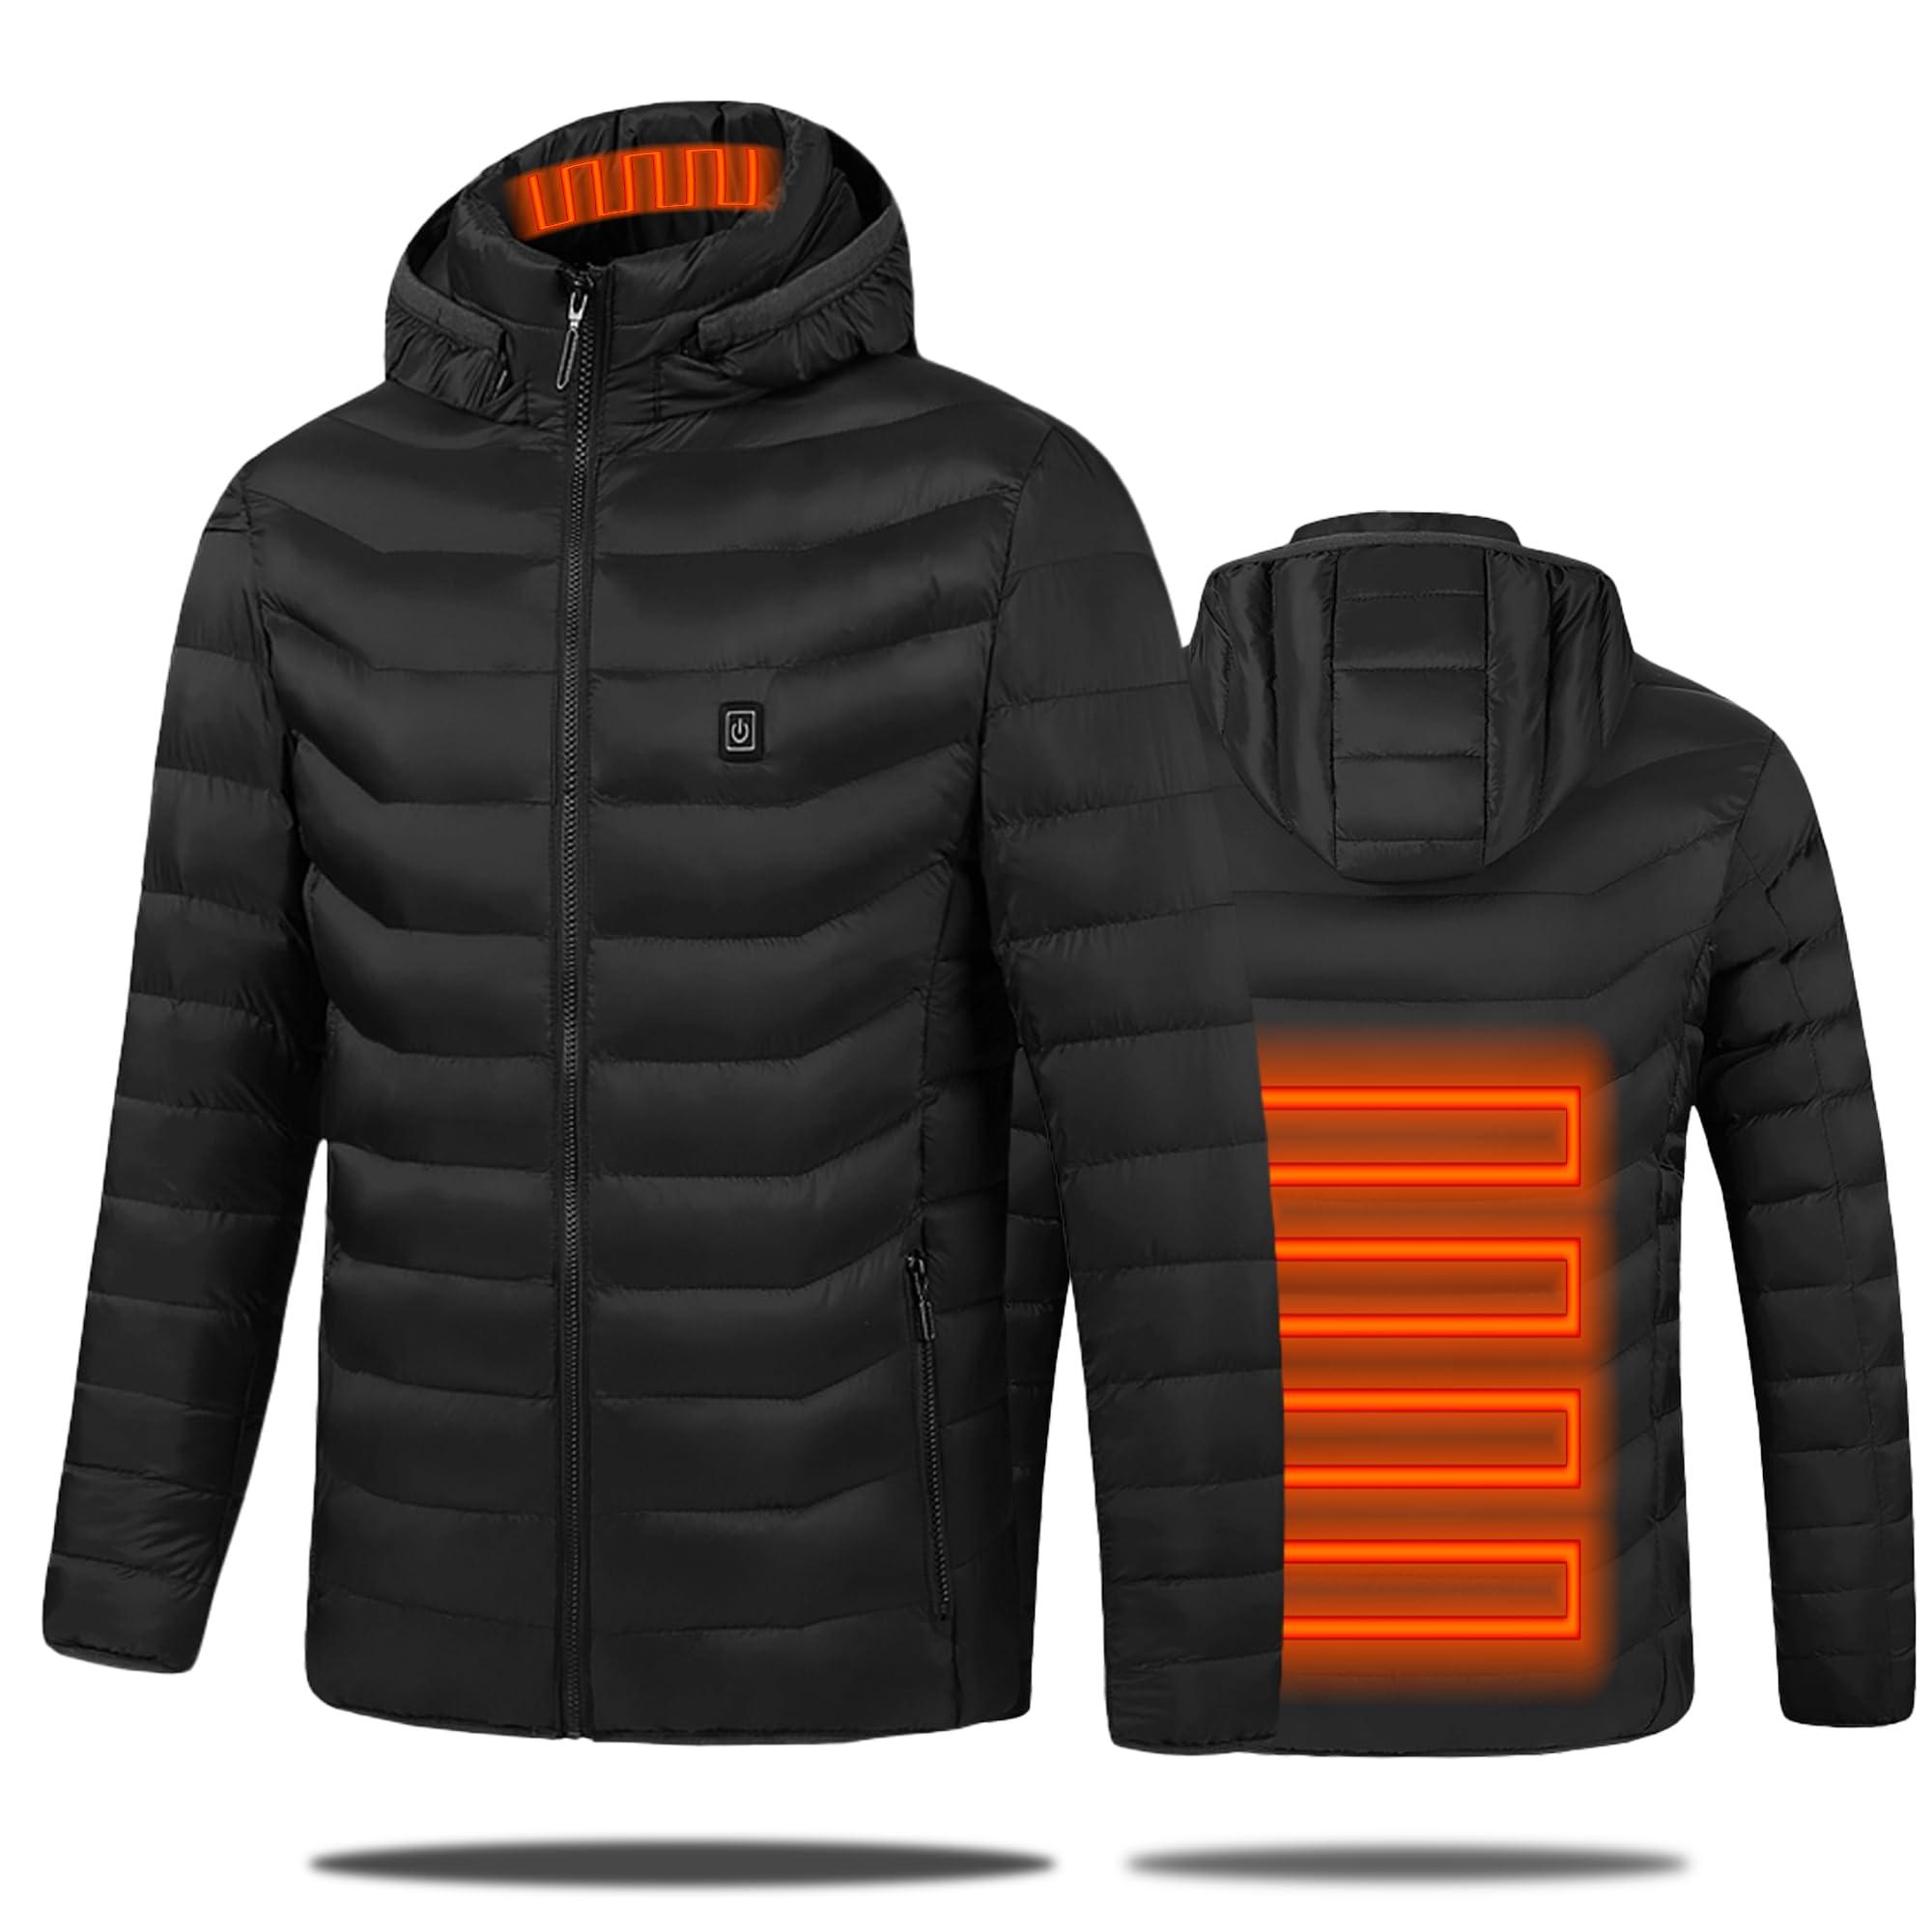 JC Gens Men’s Heated Jacket, Electric Heated Jacket with 3 Adjustable Heating Levels 2 Heating Zones, Lightweight Flexible Warming Jacket for Winter Outdoor Skiing Camping Hiking